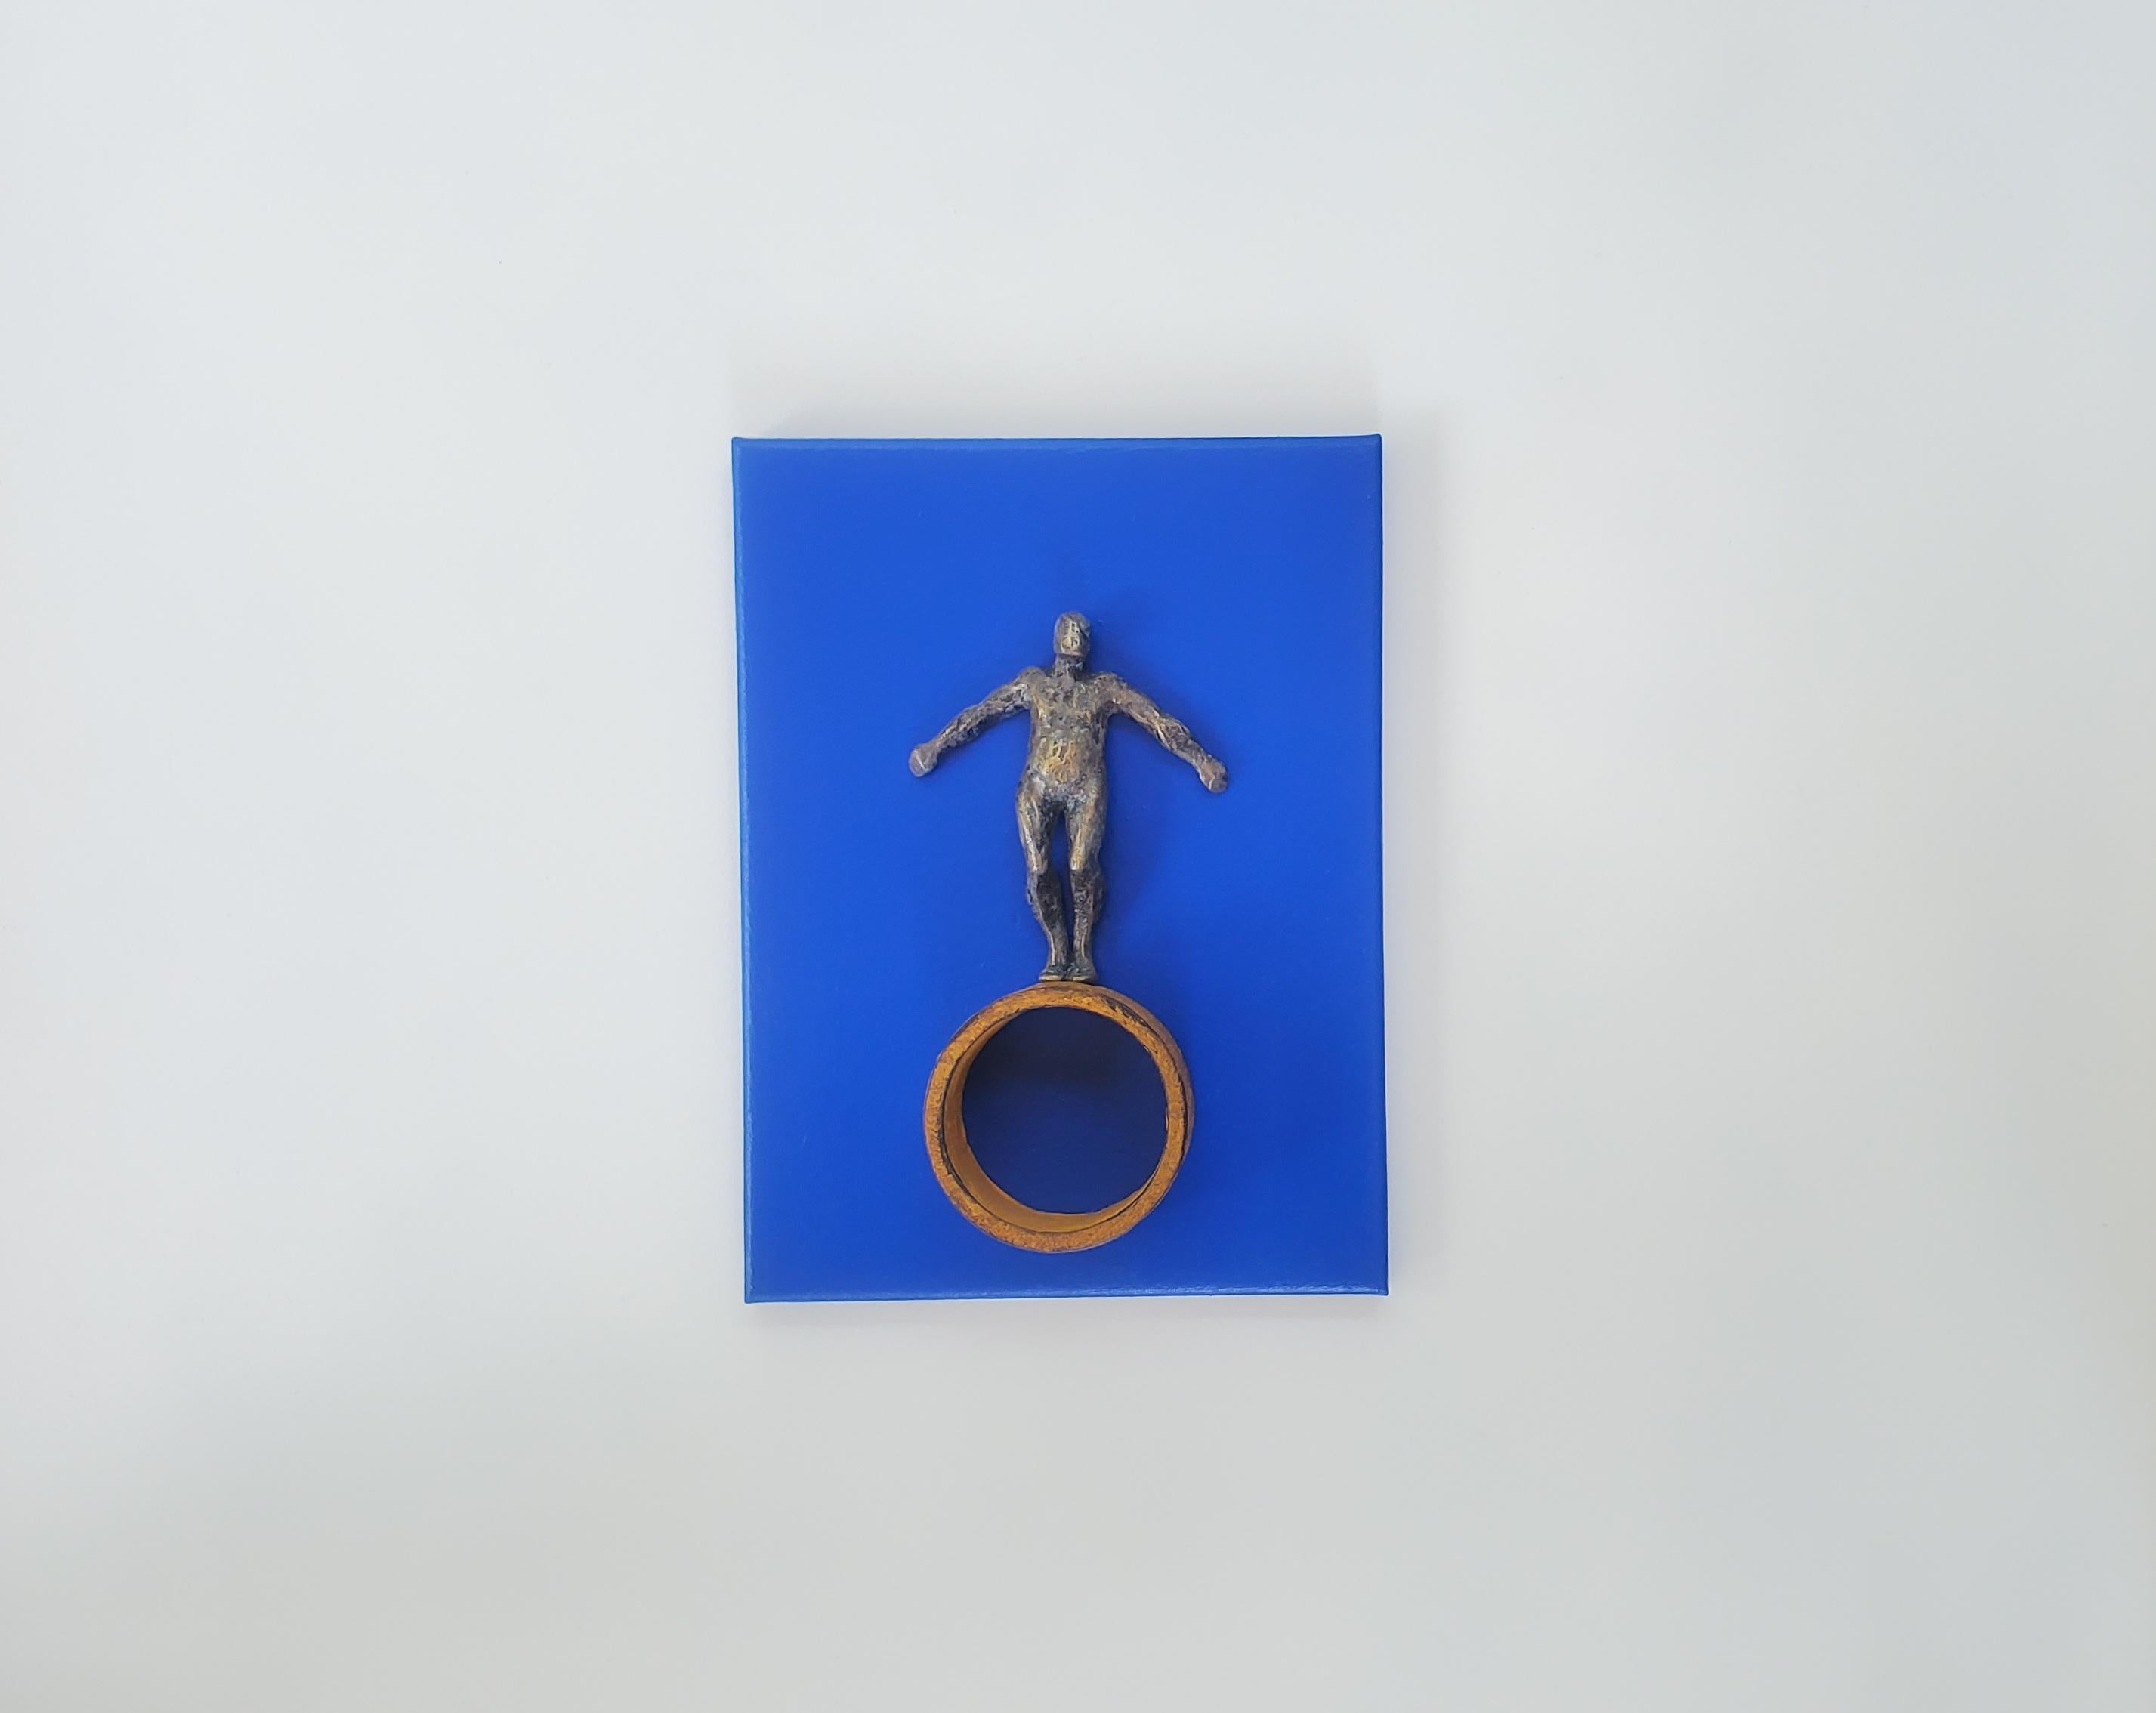 <p>Artist Comments<br>Artist Yelitza Diaz shows a bronze-colored figure balancing itself on a round structure attached to a solid blue background. Inspired by minimalism, she considers the possibility of contradicting the style by including